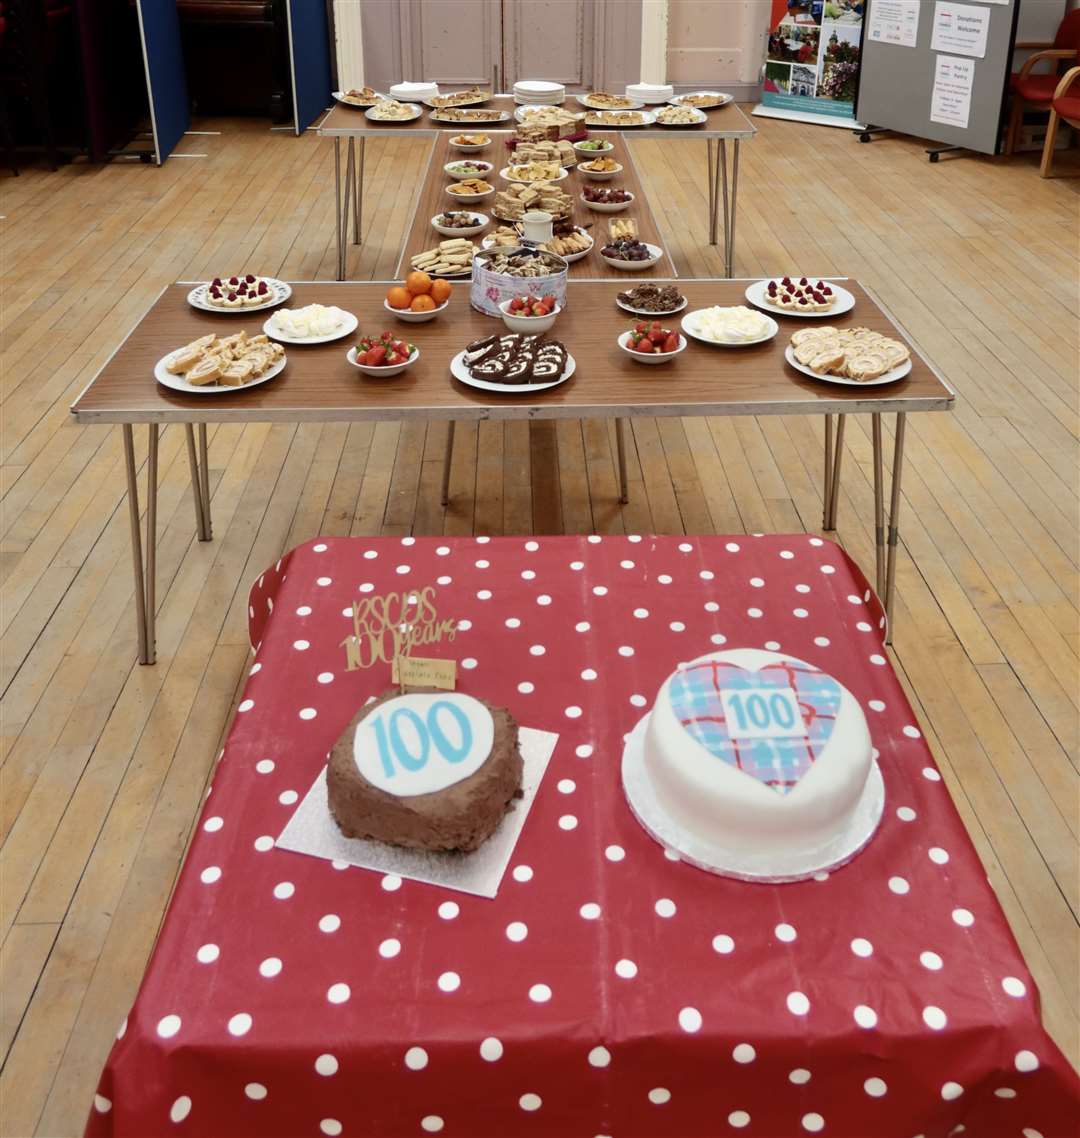 The celebration spread at the town hall.